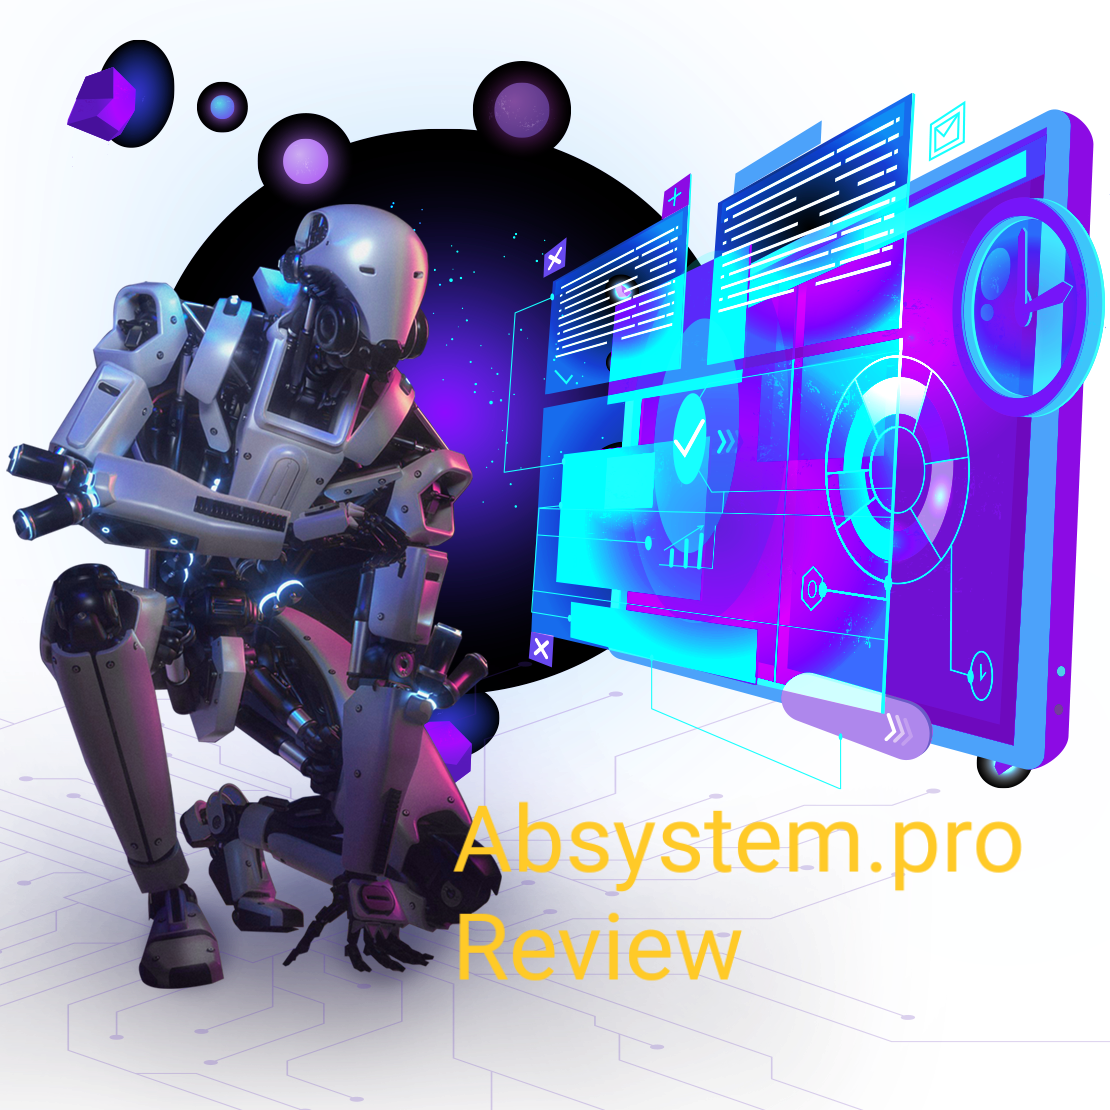 Absystem.pro Review